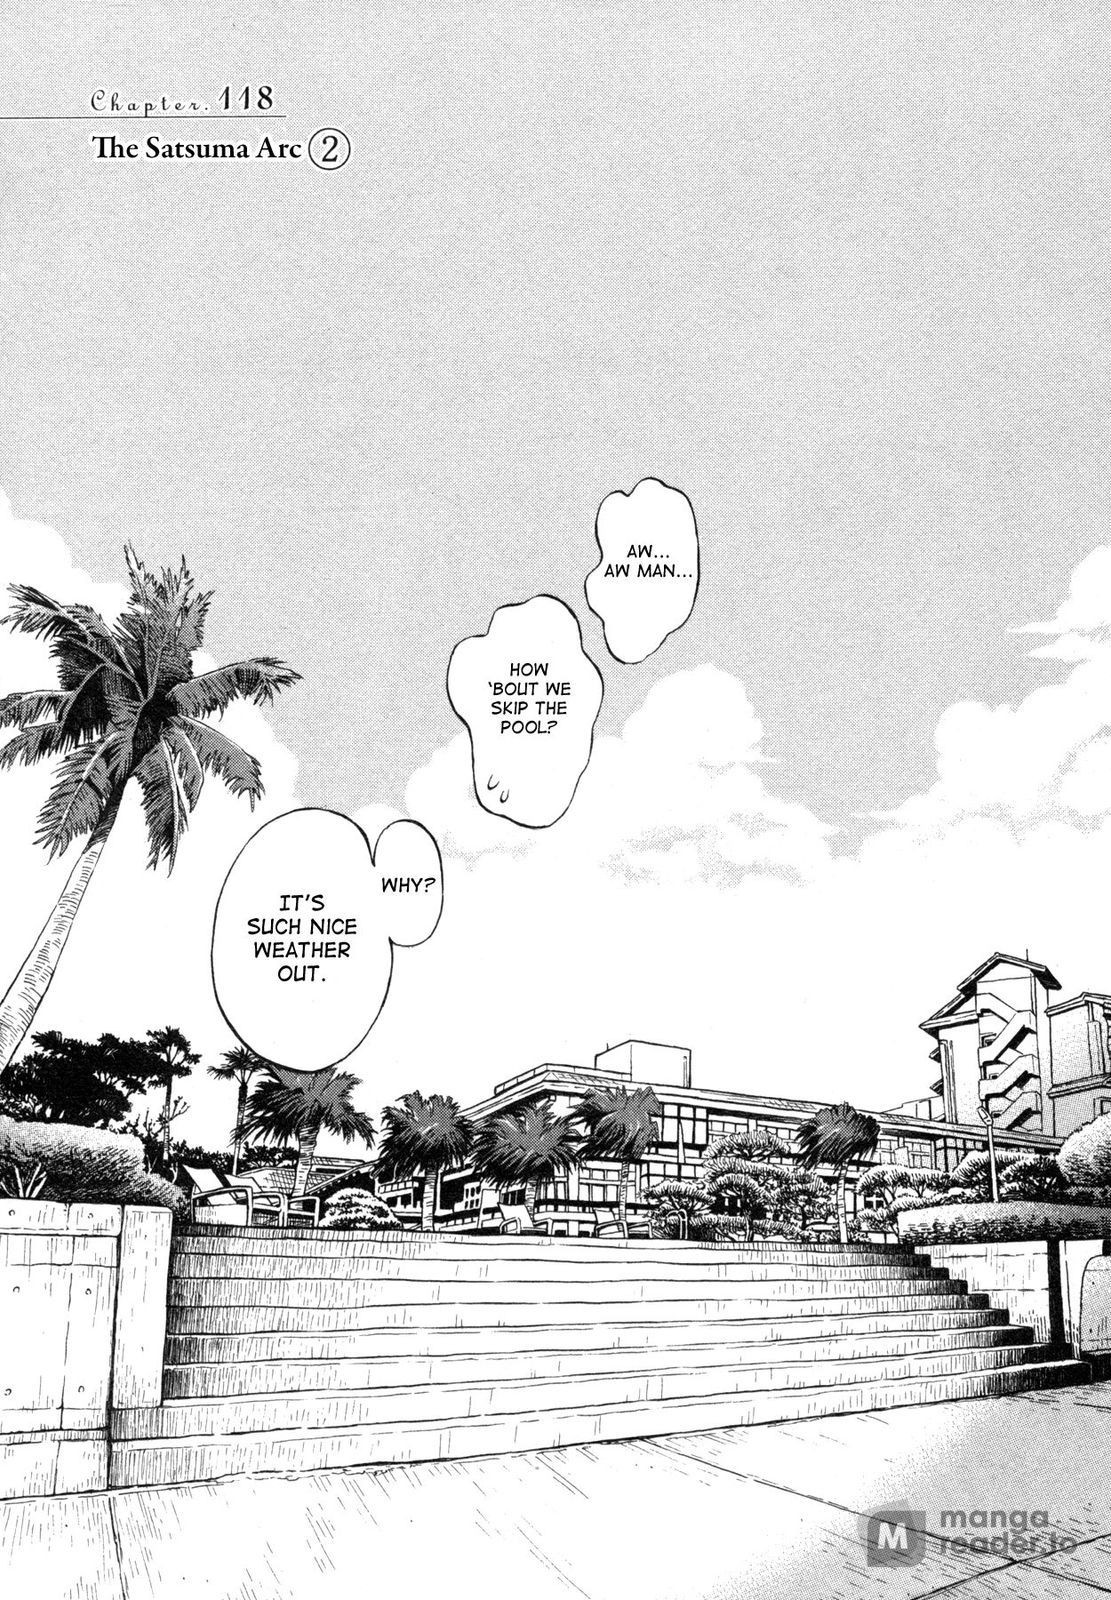 March Comes in Like a Lion, Chapter 118 The Satsuma Arc (Part 2) (EN) image 01